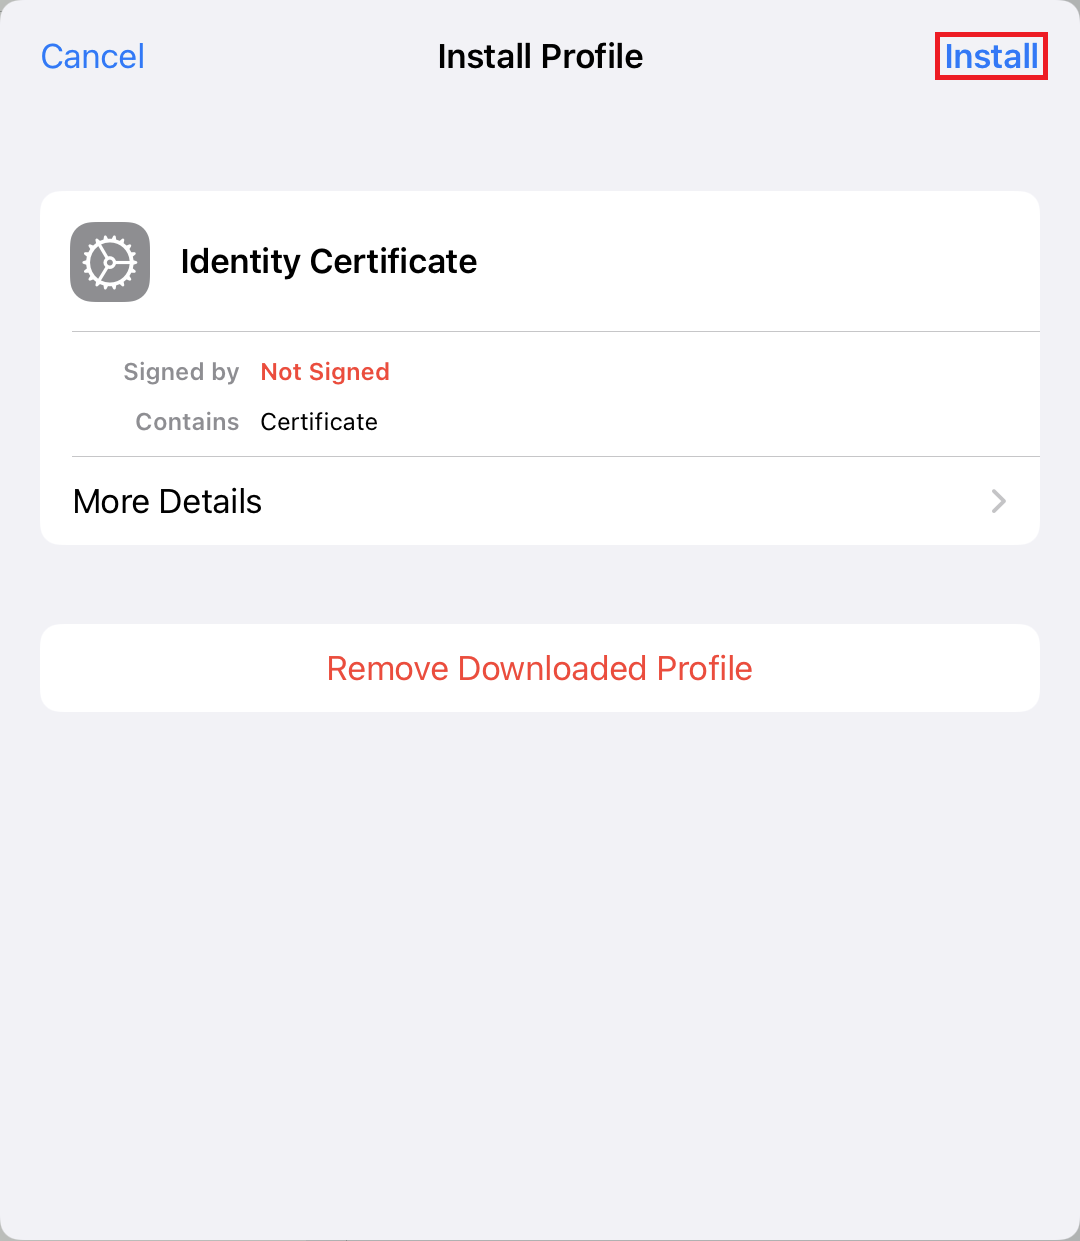 Window Install Profile, left clickable Cancel, right marked and clickable Install. Symbol clock gear, Identity Certificate Signed by, Not Signed. Contains, Certificate. More Details, right Larger sign. In red Font, Remove Downloaded Profile.